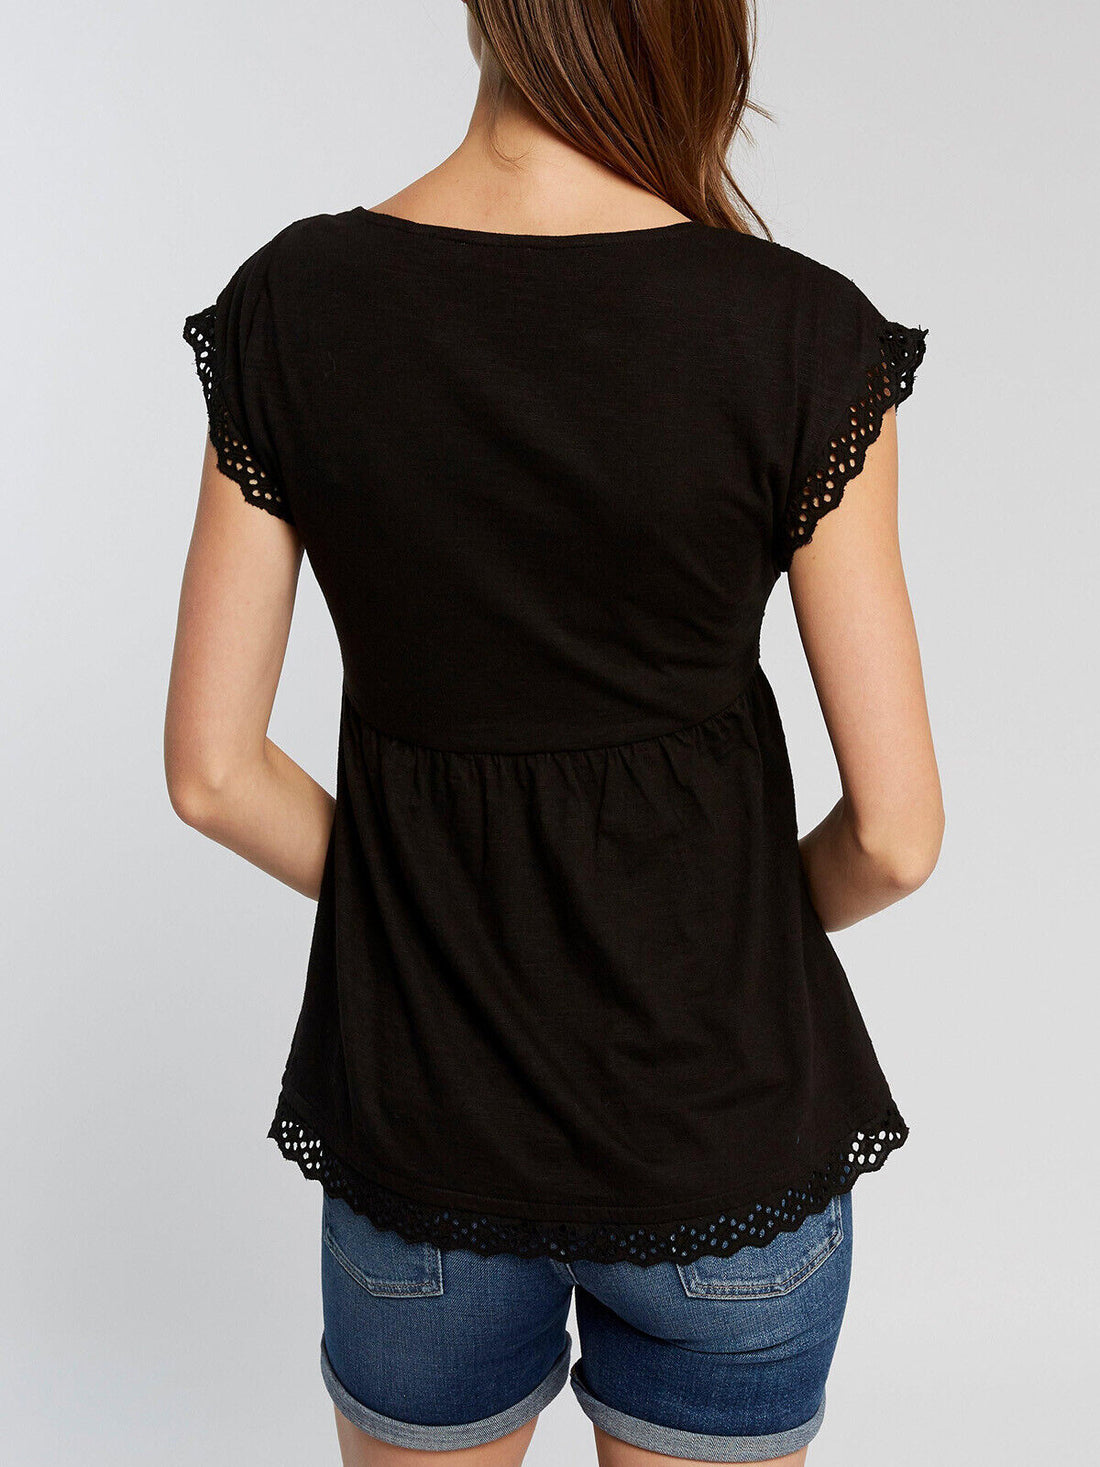 EX Fat Face Black Orchid Broderie Top in Size 10 RRP £35